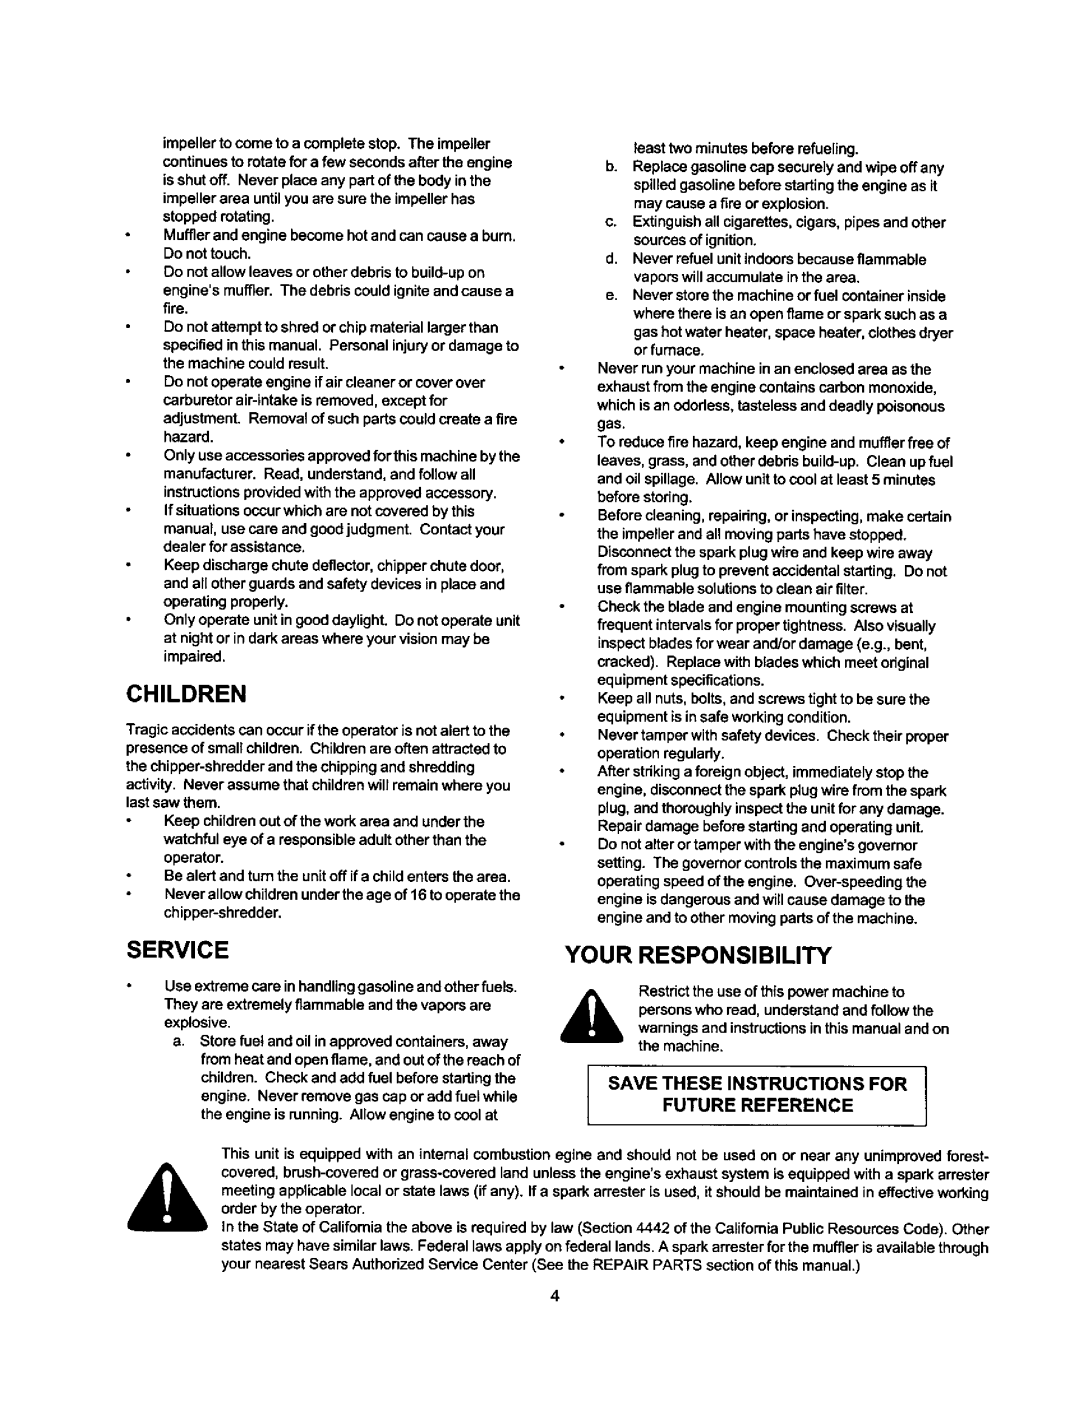 Craftsman 247.77588O owner manual impellertocometoacompletestopTheimpeller, Children, Your Responsibility, Service 